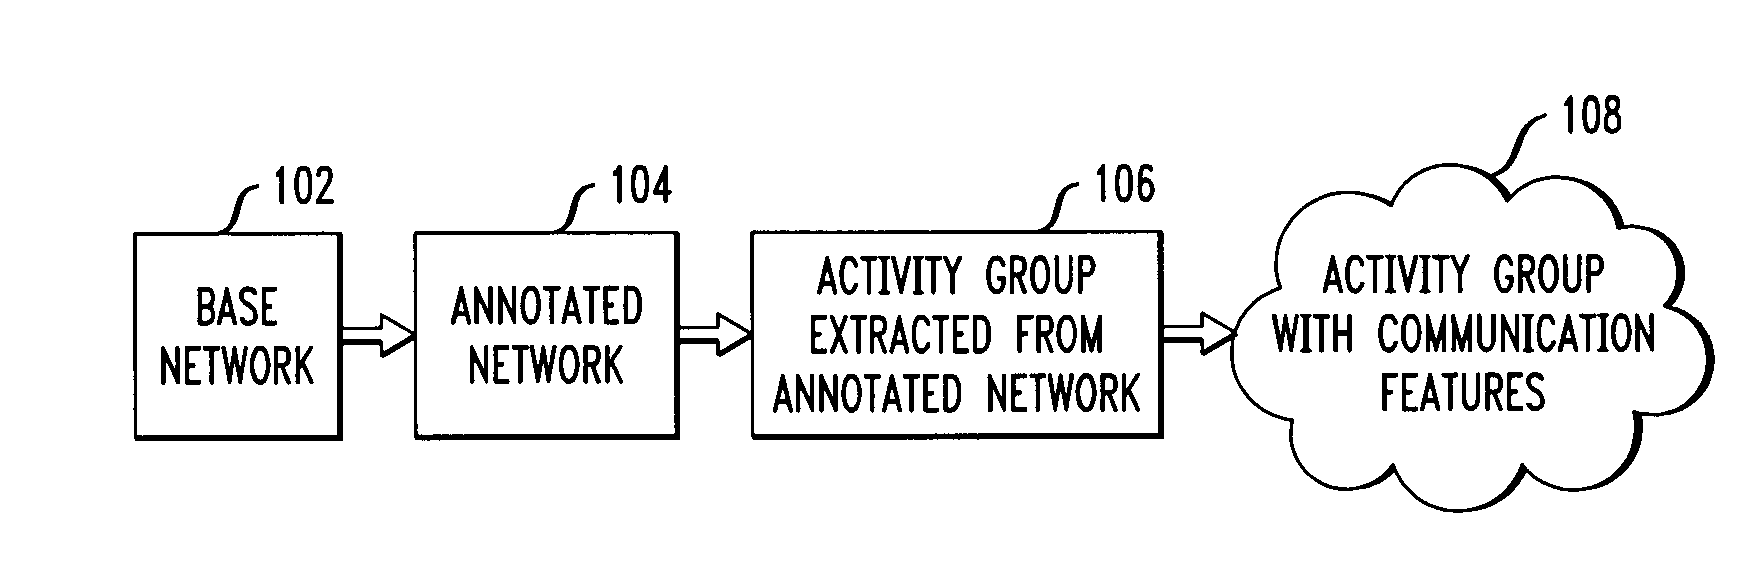 Forming Dynamic Real-Time Activity Groups